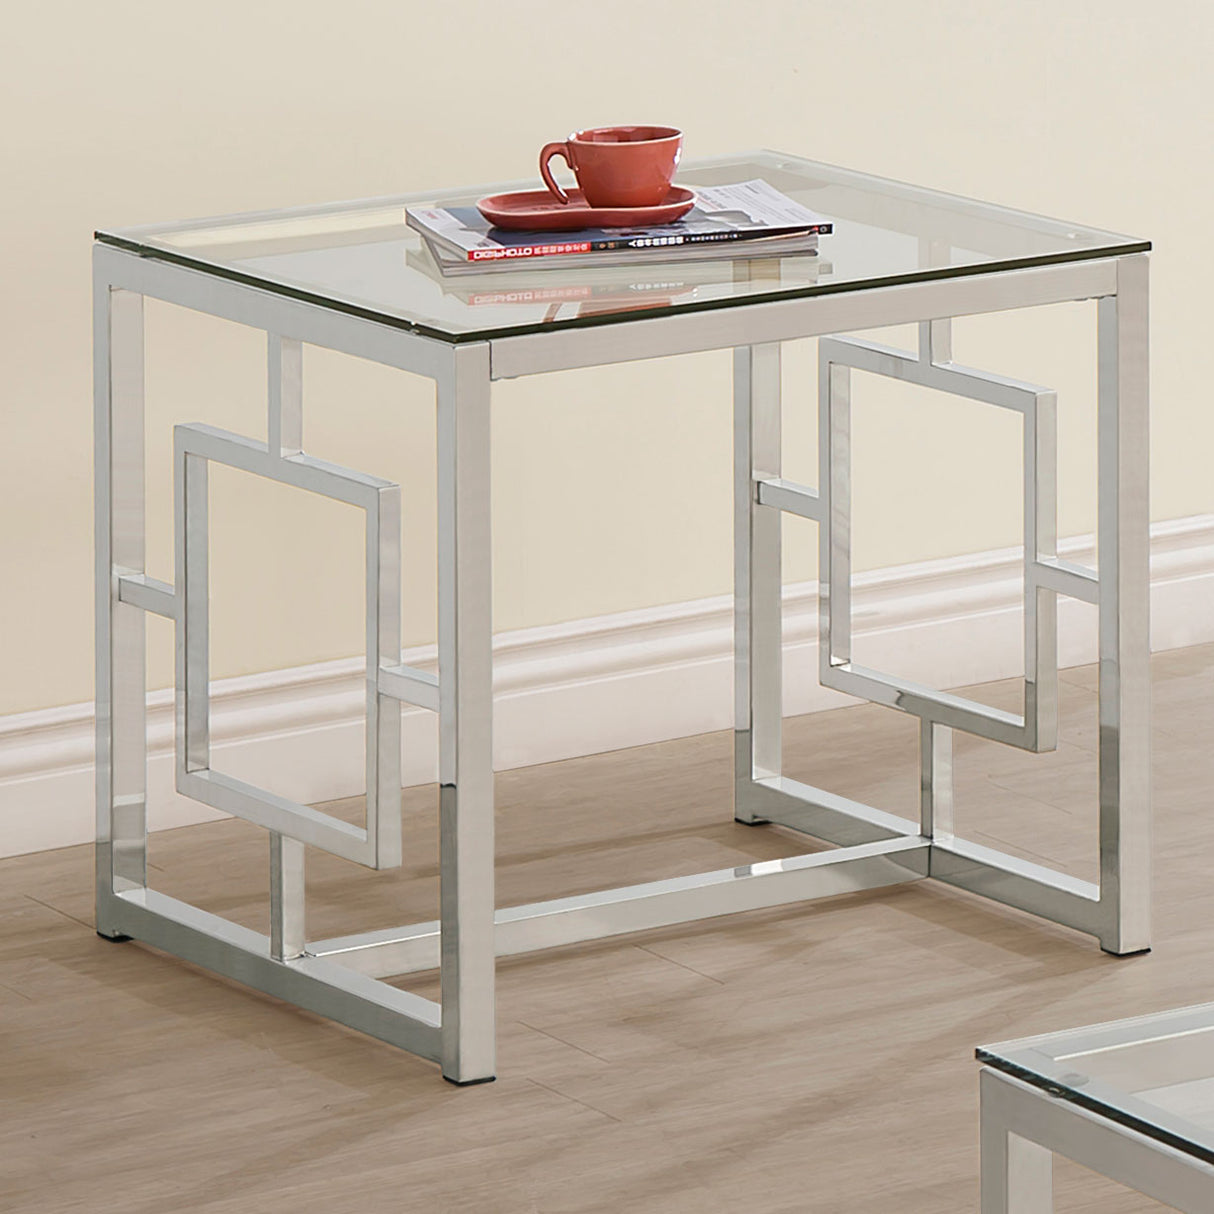 End Table - Merced Square Tempered Glass Top End Table Nickel